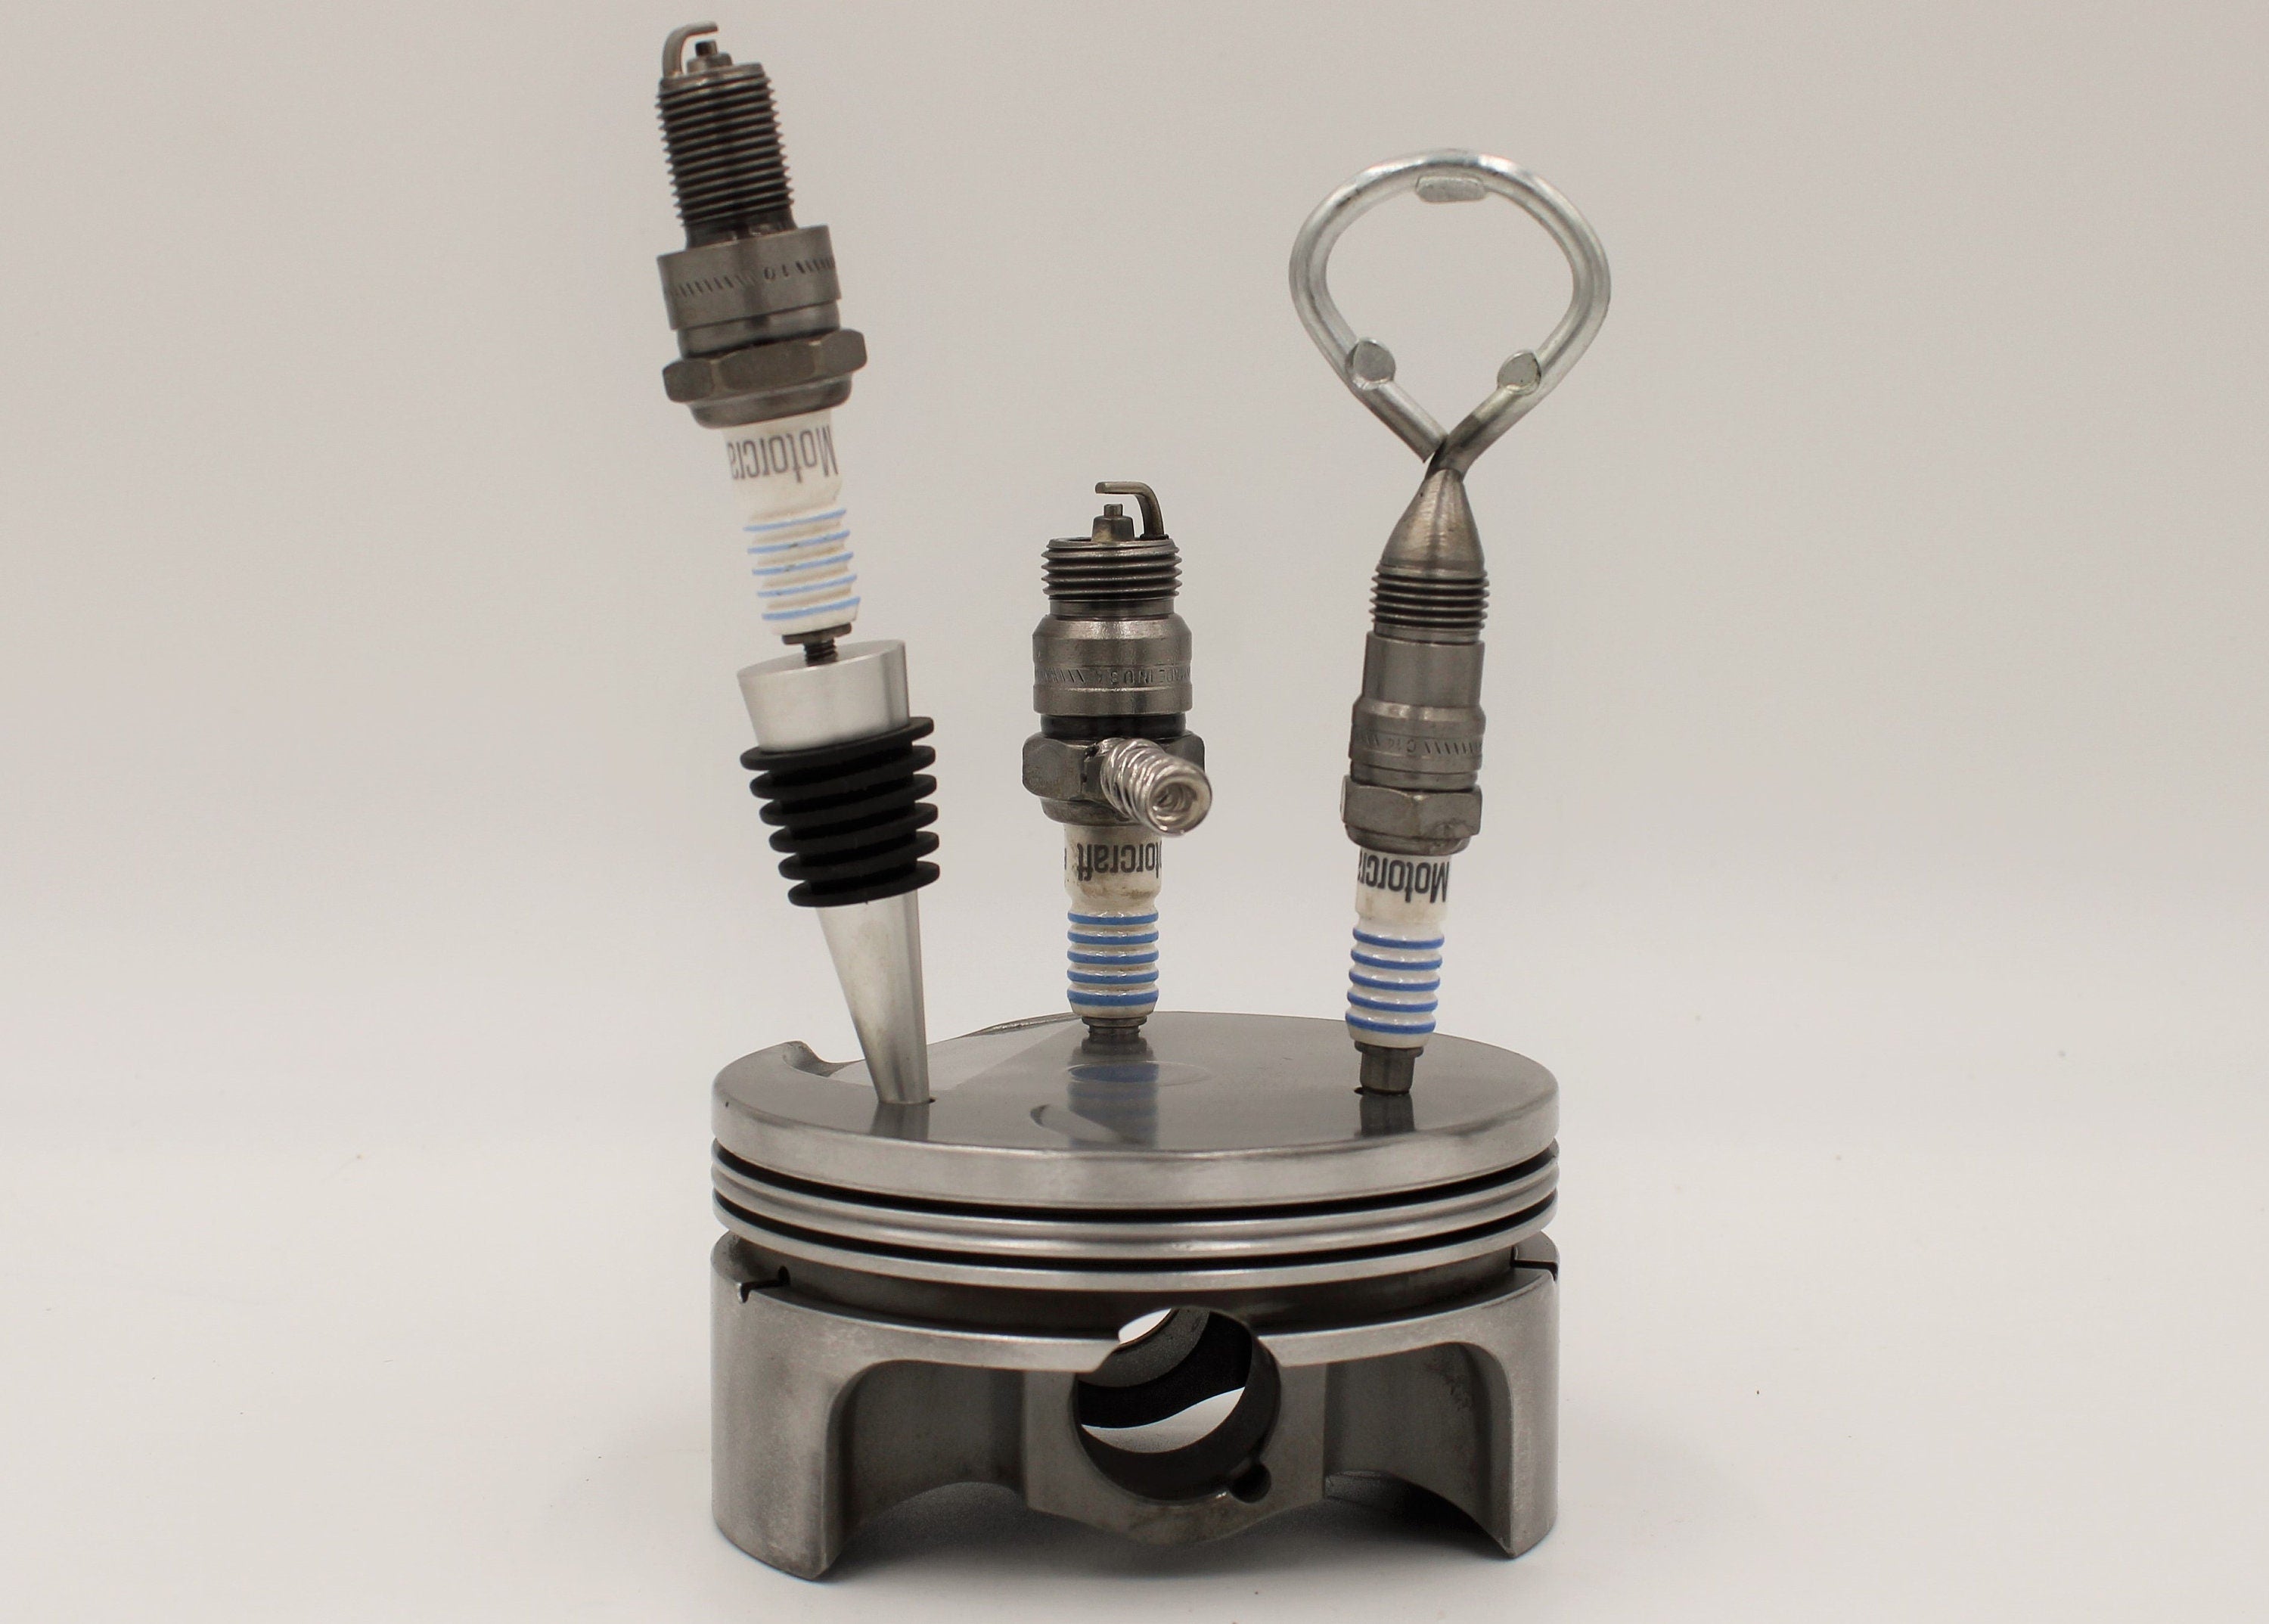 Spark plug bar set including a wine stopper, corkscrew and bottle opener, all made from car spark plugs and in a car piston holder.